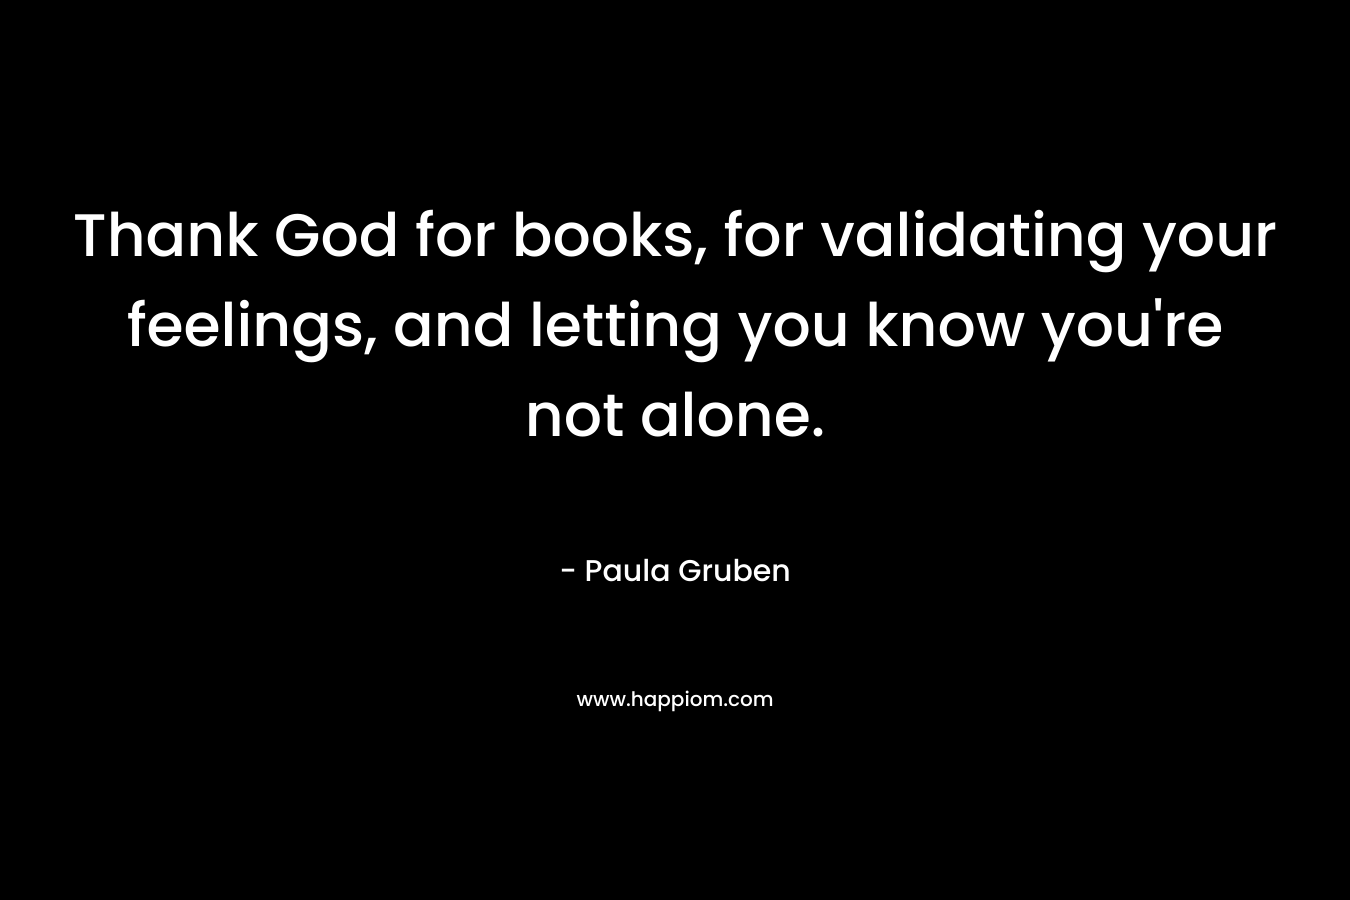 Thank God for books, for validating your feelings, and letting you know you're not alone.